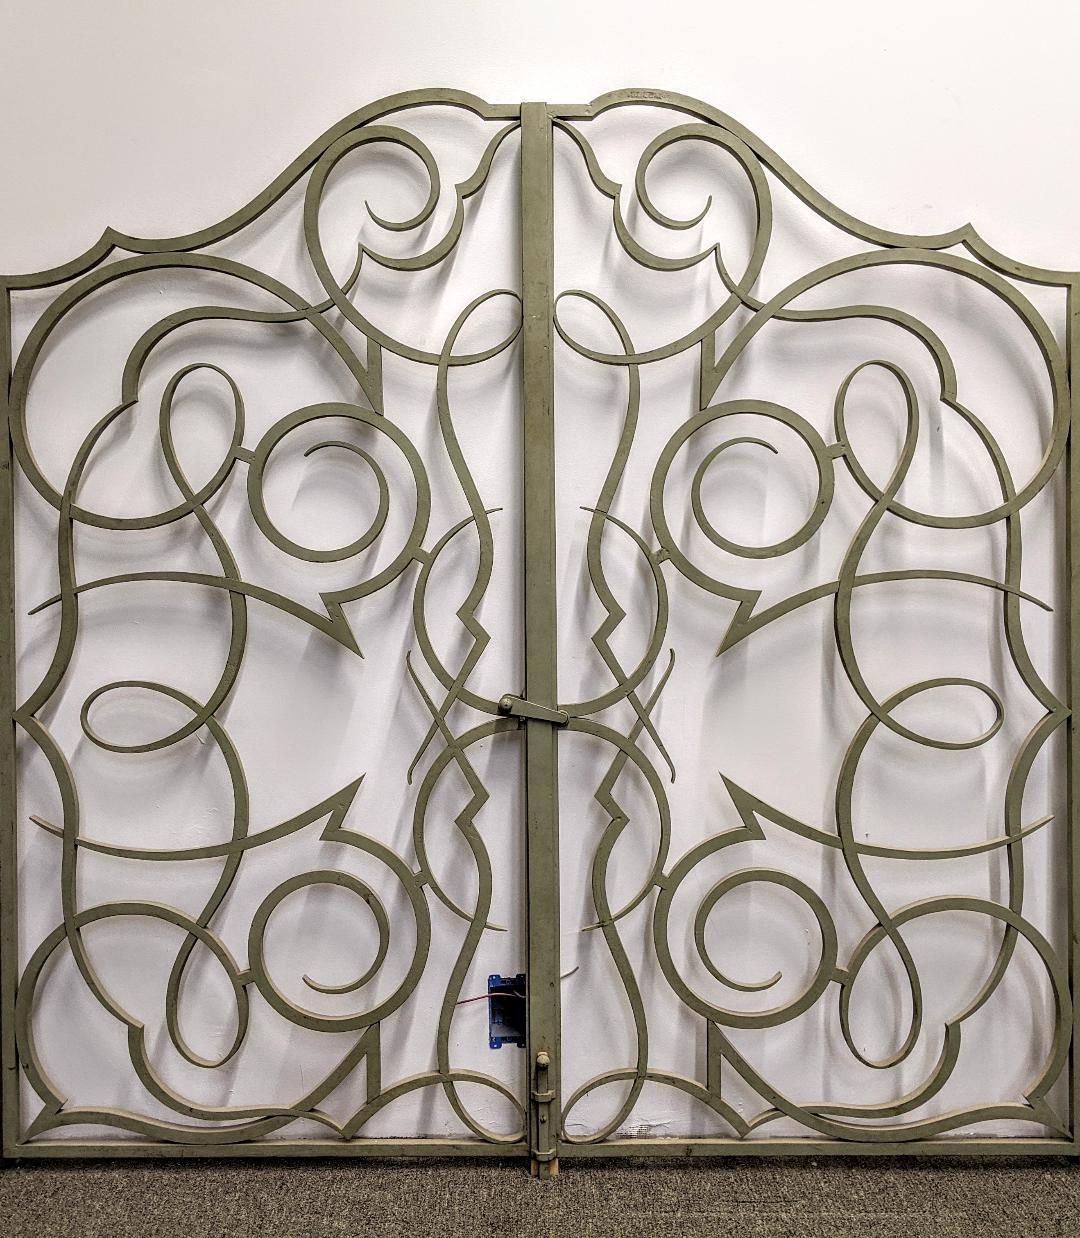 A French Art Deco wrought iron set of double-sided doors, gates, or screens. Each side consists of two separate sections that are attached by hinges with a center latch. We are the rare source that has specialized exclusively in French Art Deco for